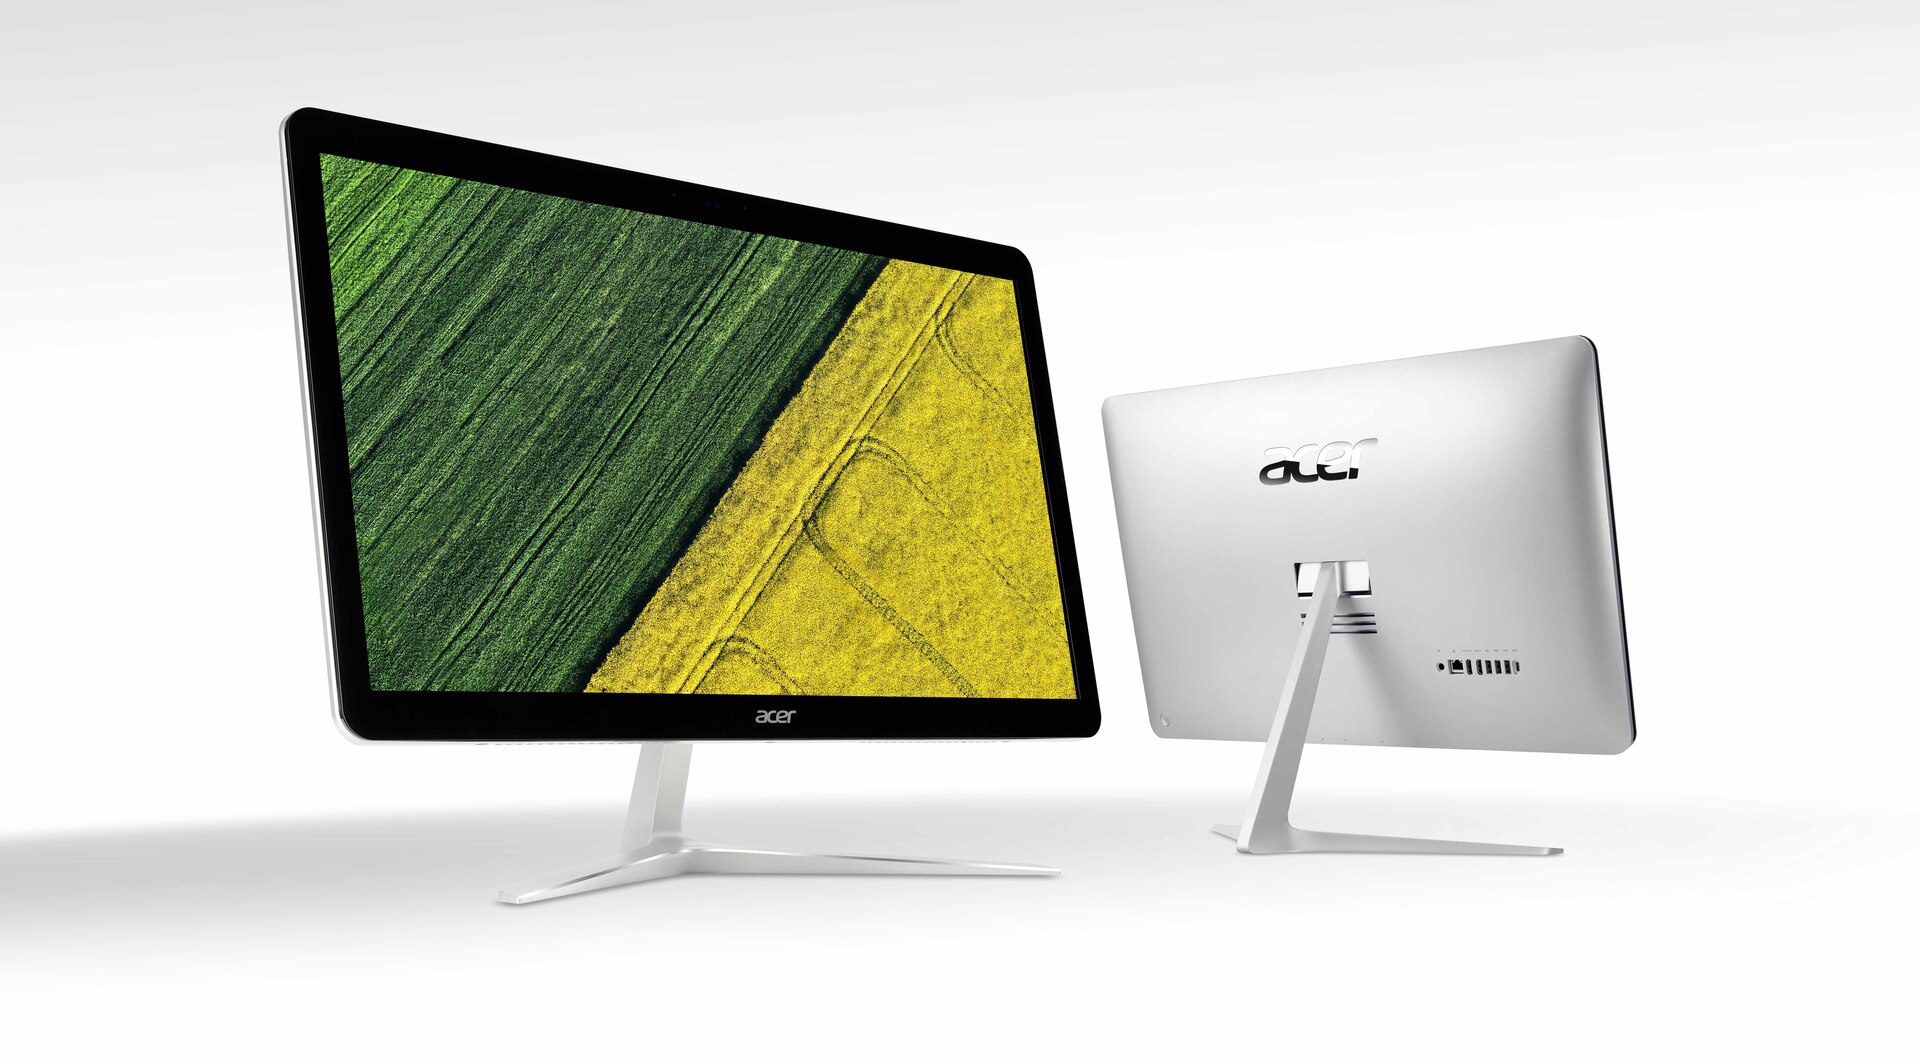 Acer U27 all-in-one